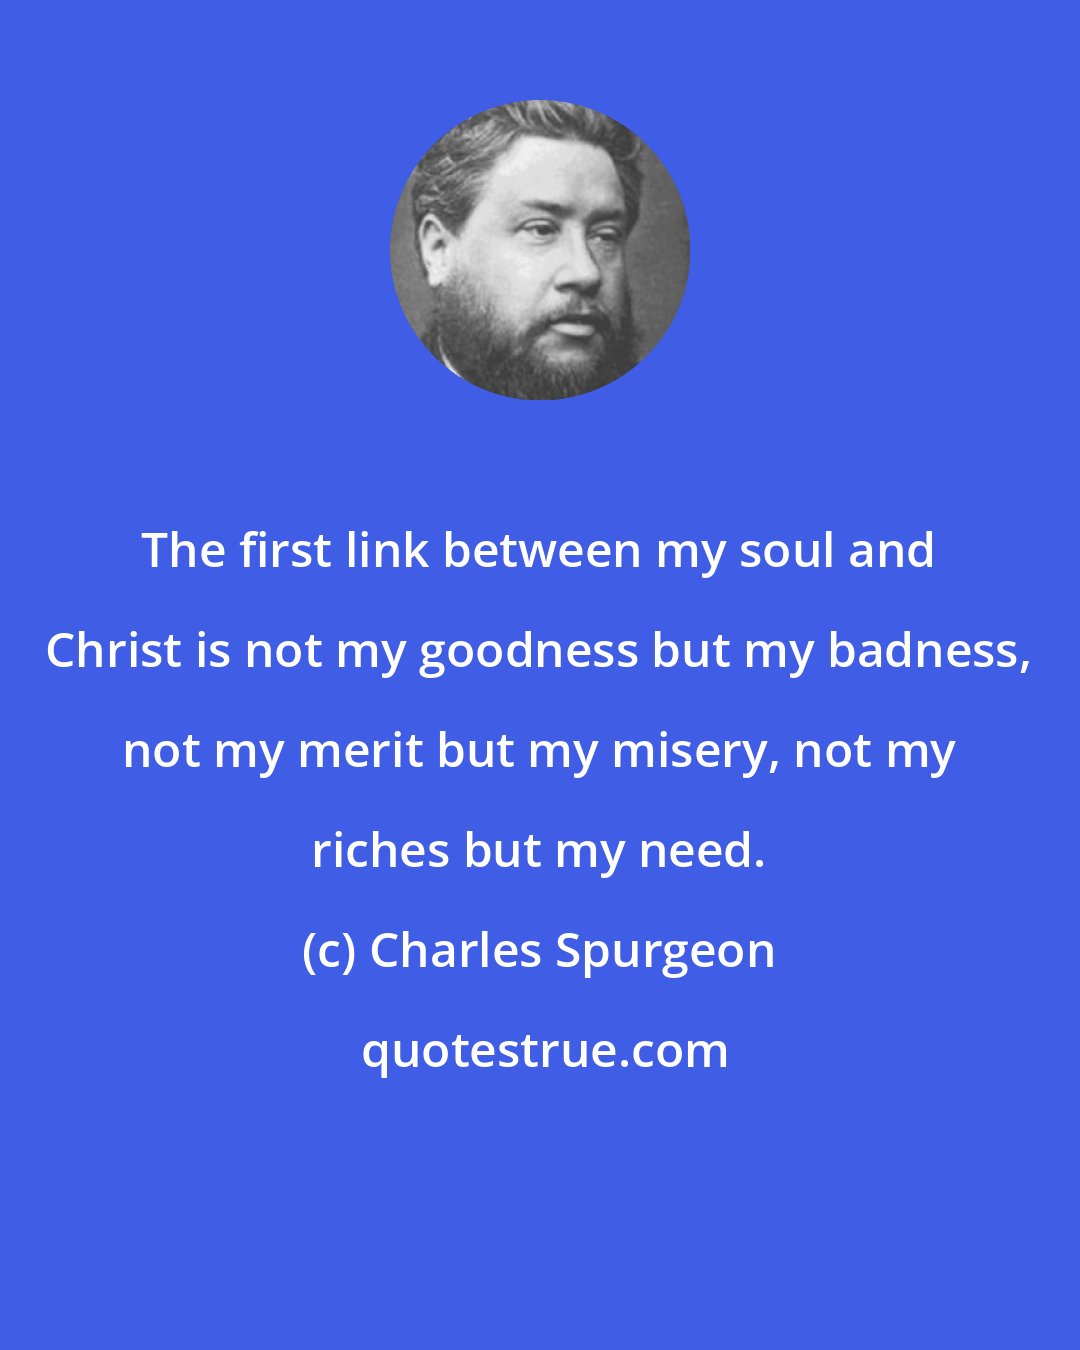 Charles Spurgeon: The first link between my soul and Christ is not my goodness but my badness, not my merit but my misery, not my riches but my need.